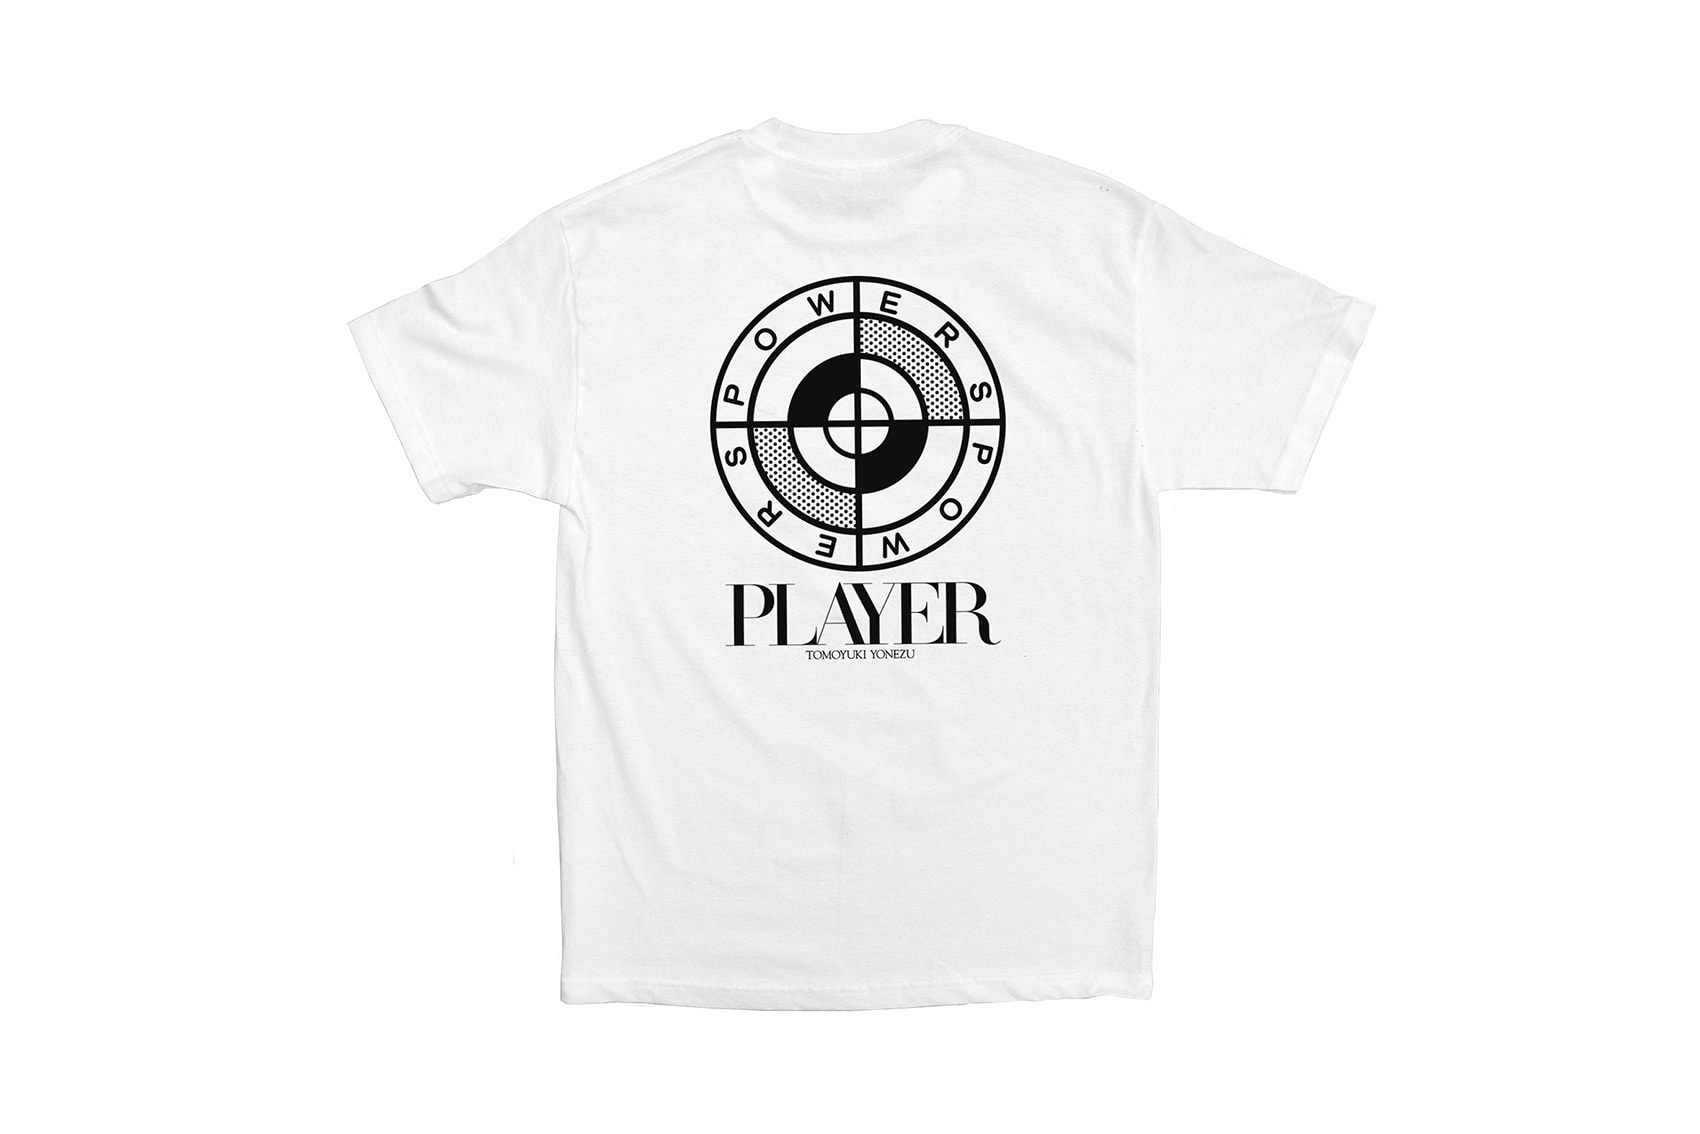 Tomoyuki Yonezu x Powers Supply "PLAYER" T-Shirt capsule collection domicile tokyo japan release date graphics price